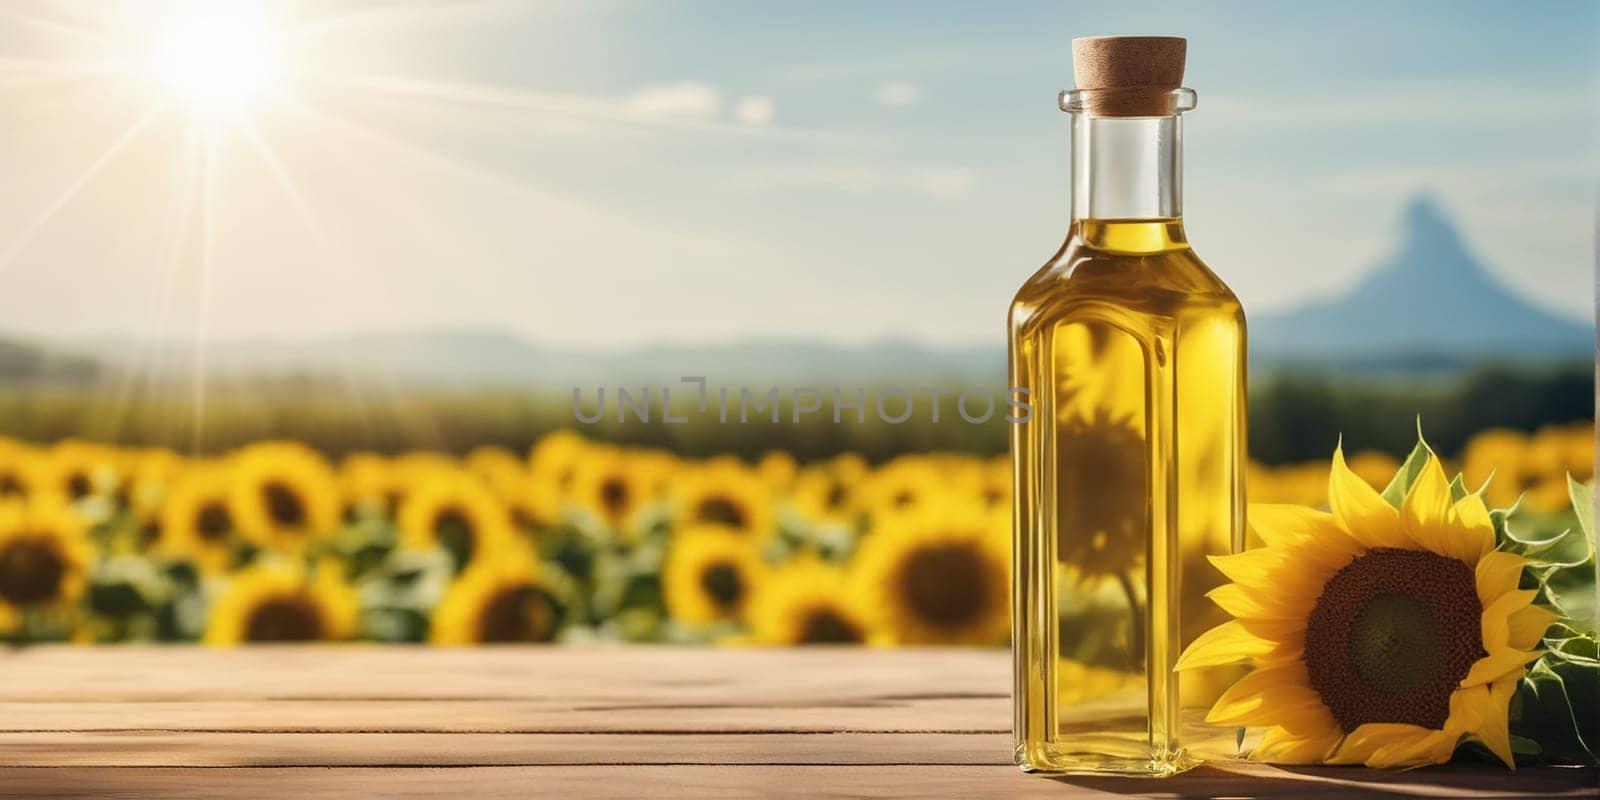 Transparent bottle of oil stands on a wooden table on of a field of sunflowers at background by Annu1tochka